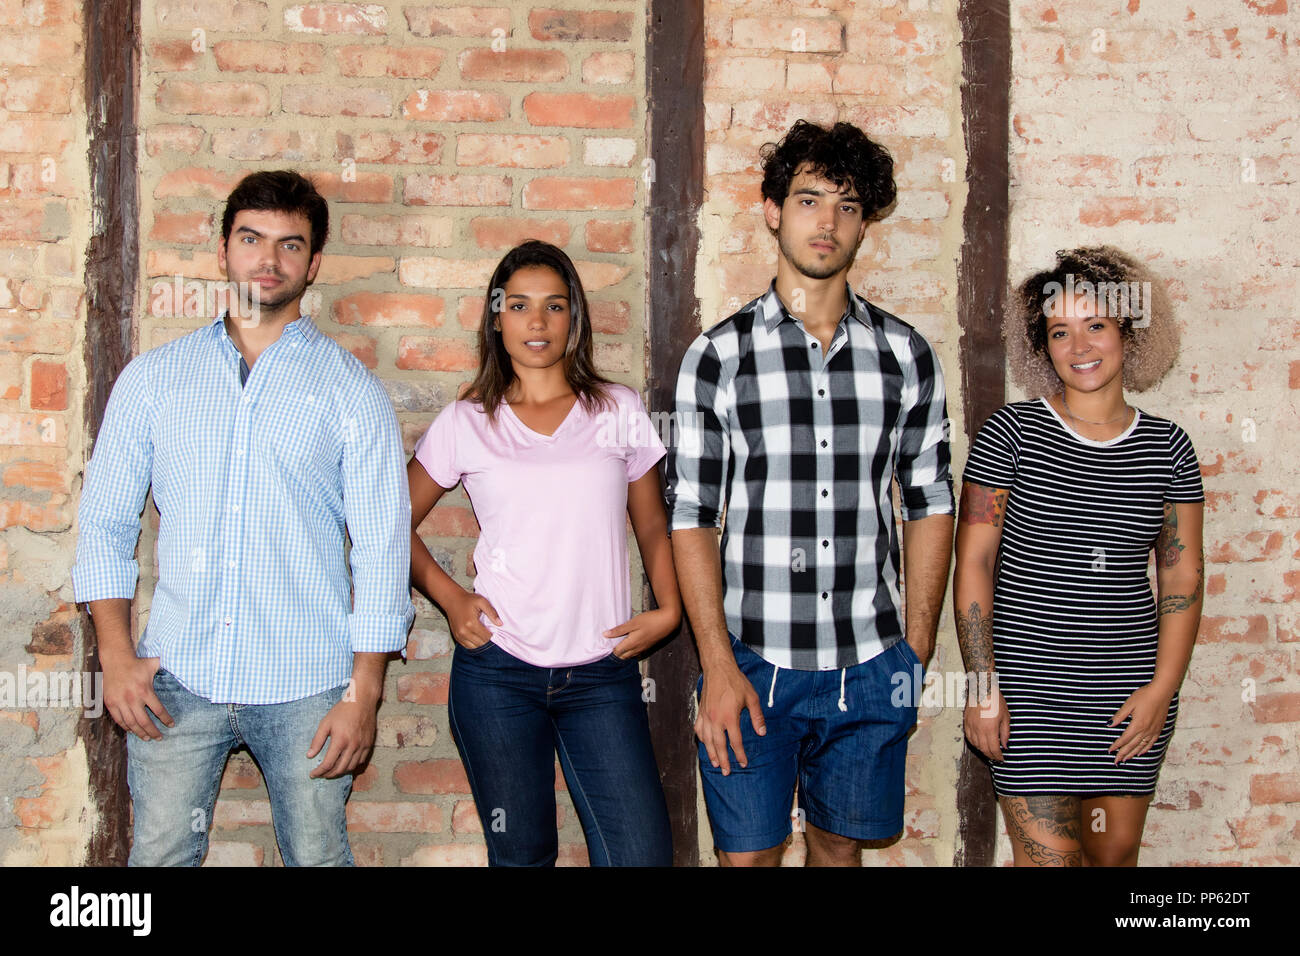 Group of smart young people in casual clothes looking at camera Stock Photo